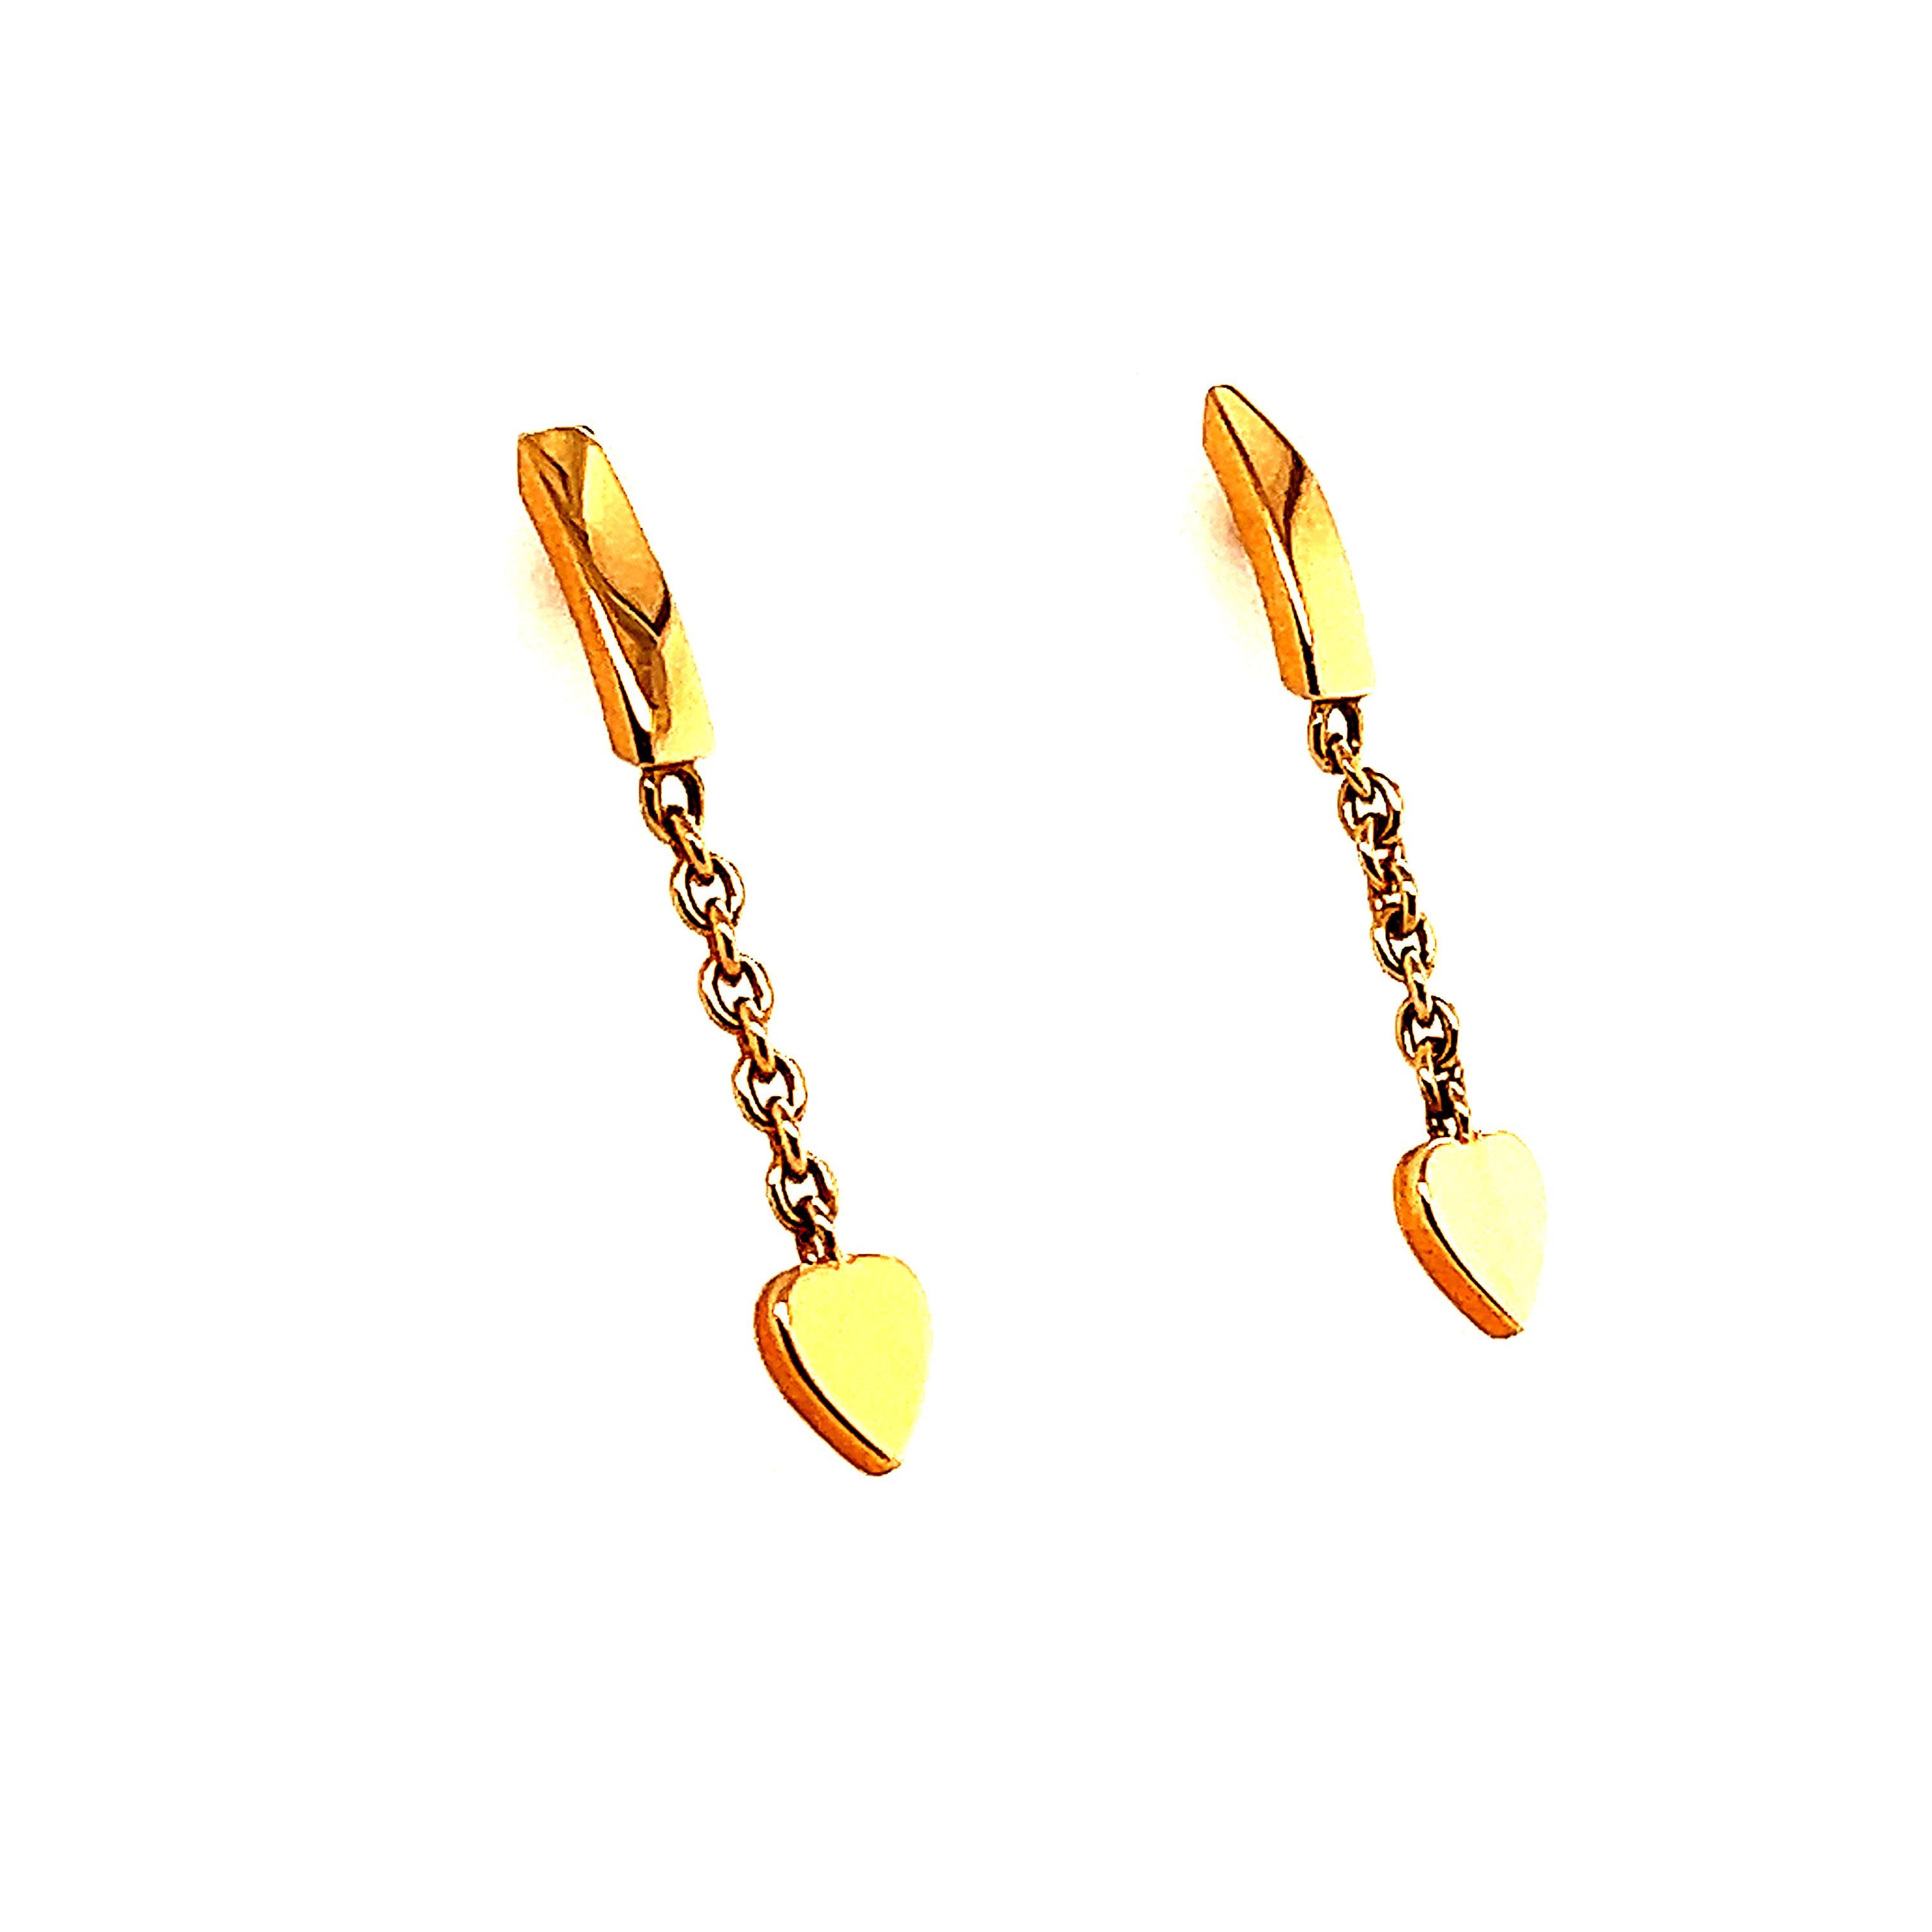 Beautiful every day earrings crafted from fame designer Cartier. The pair is from the mon amour line and crafted in 18k rose gold. The pair shows stud like post earrings with a short chain that leads to a dangling heart. These earrings are delicate